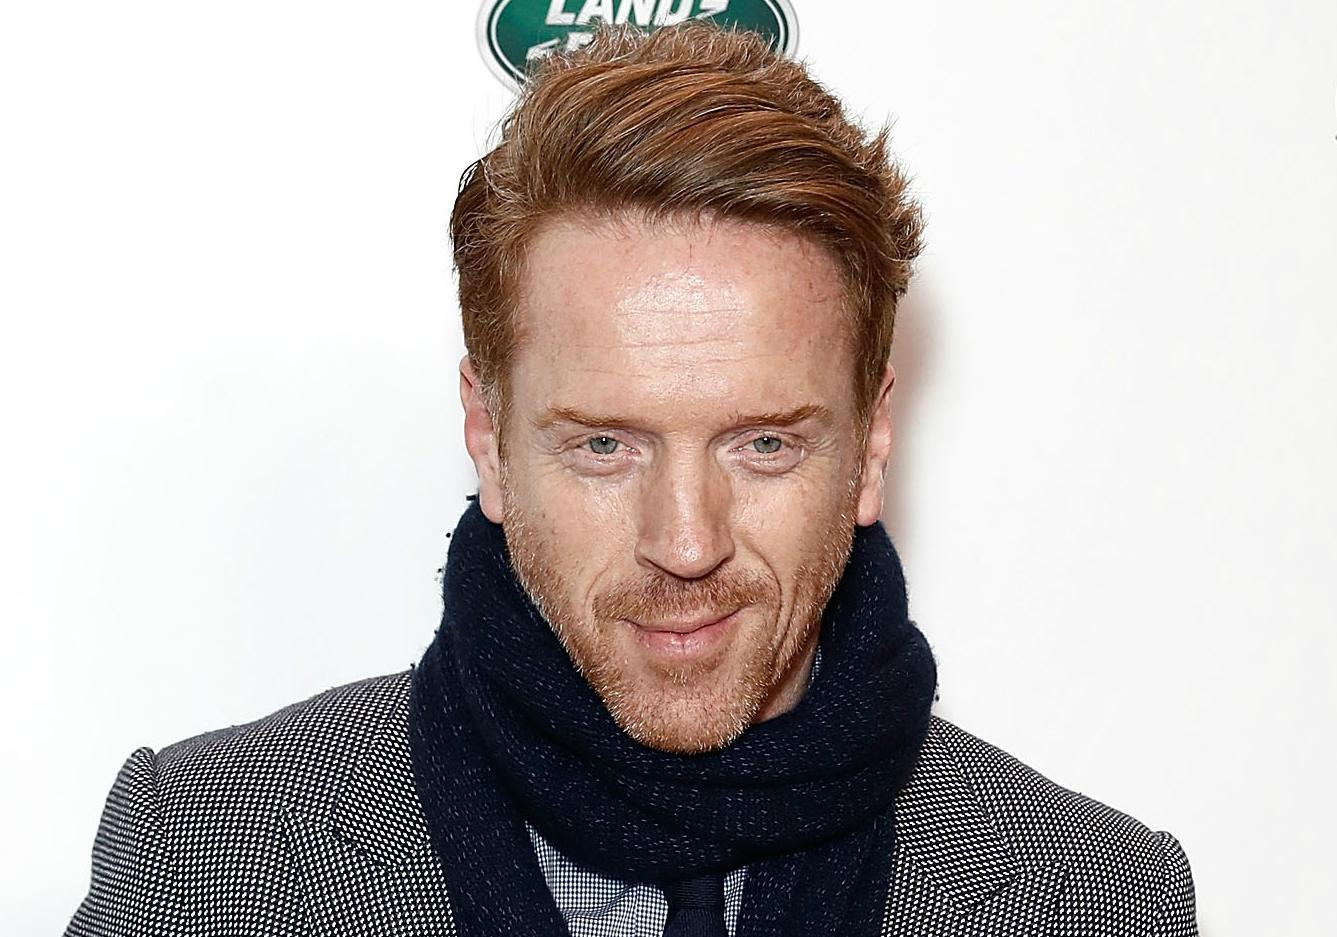 Damian Lewis: 'As an actor educated at Eton, I'm still always in a minority' | The Independent